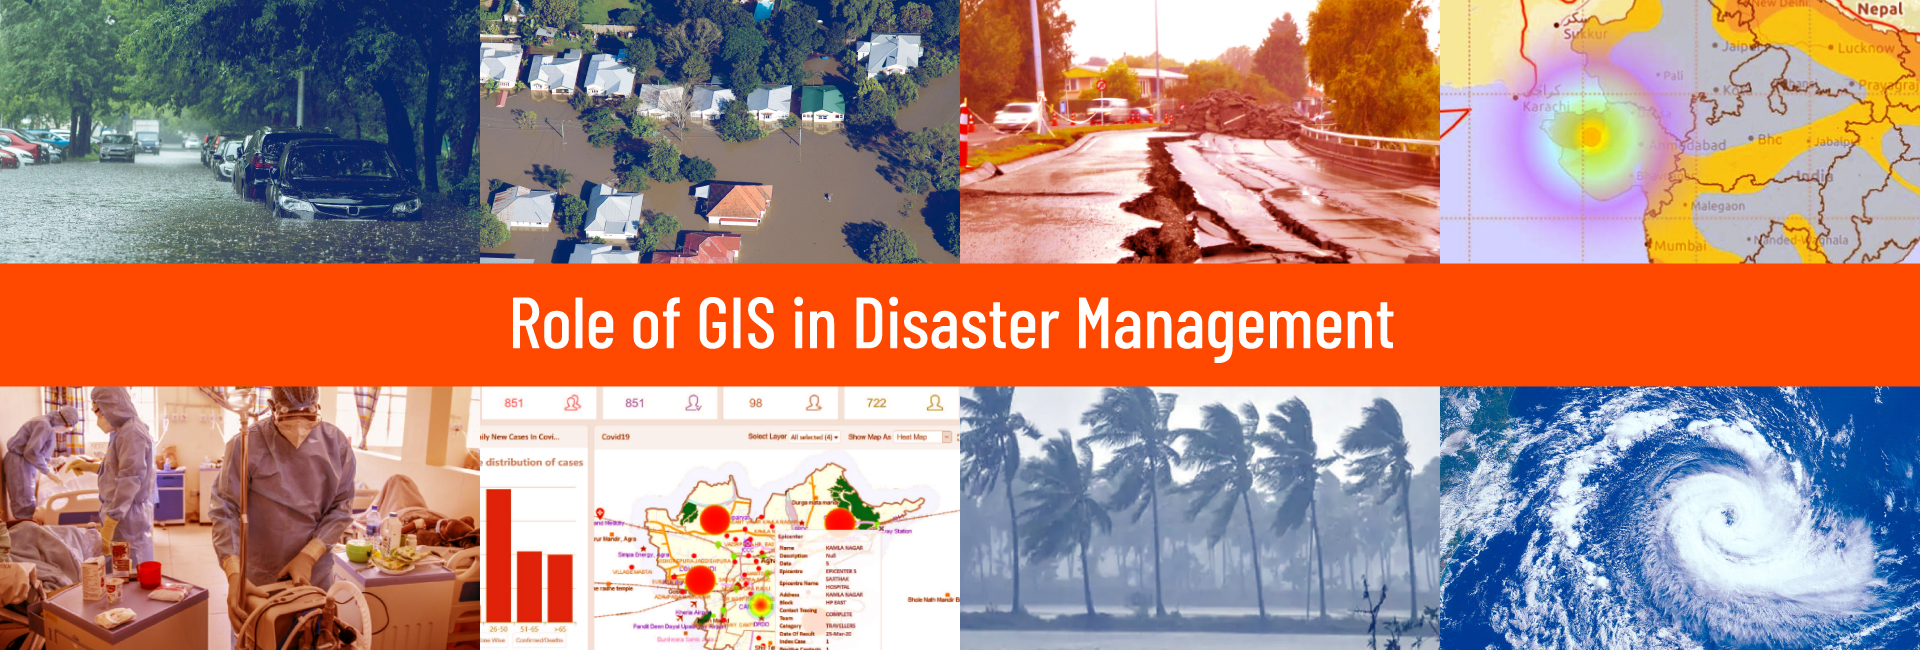 Role of GIS in Disaster Management